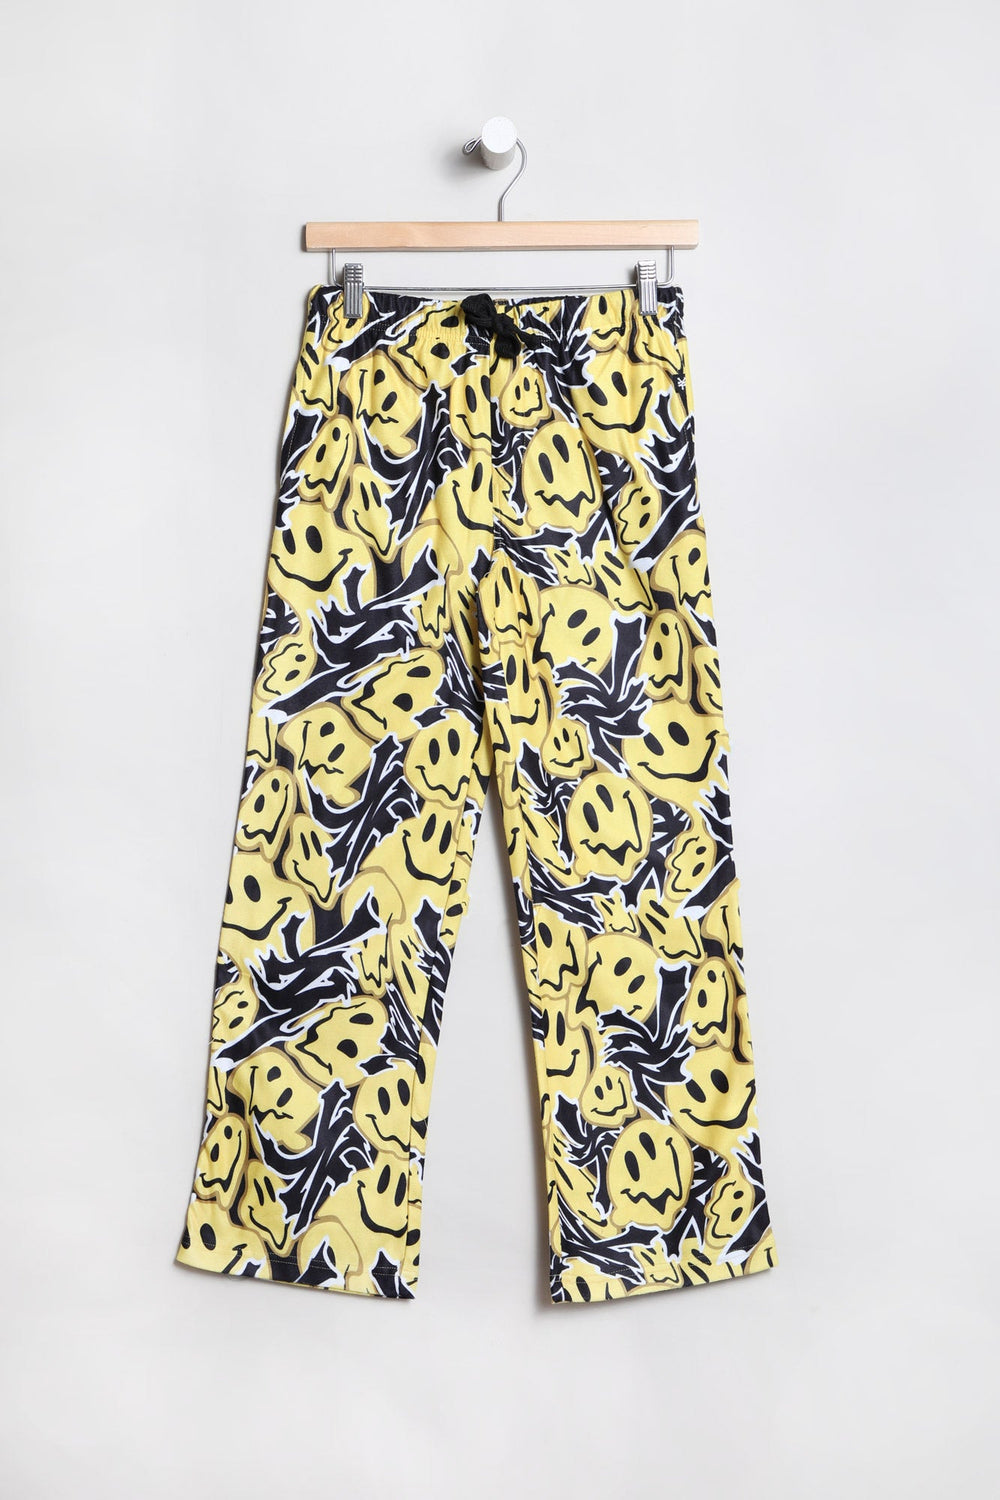 Zoo York Youth Melted Smiley Pajama Bottoms Yellow